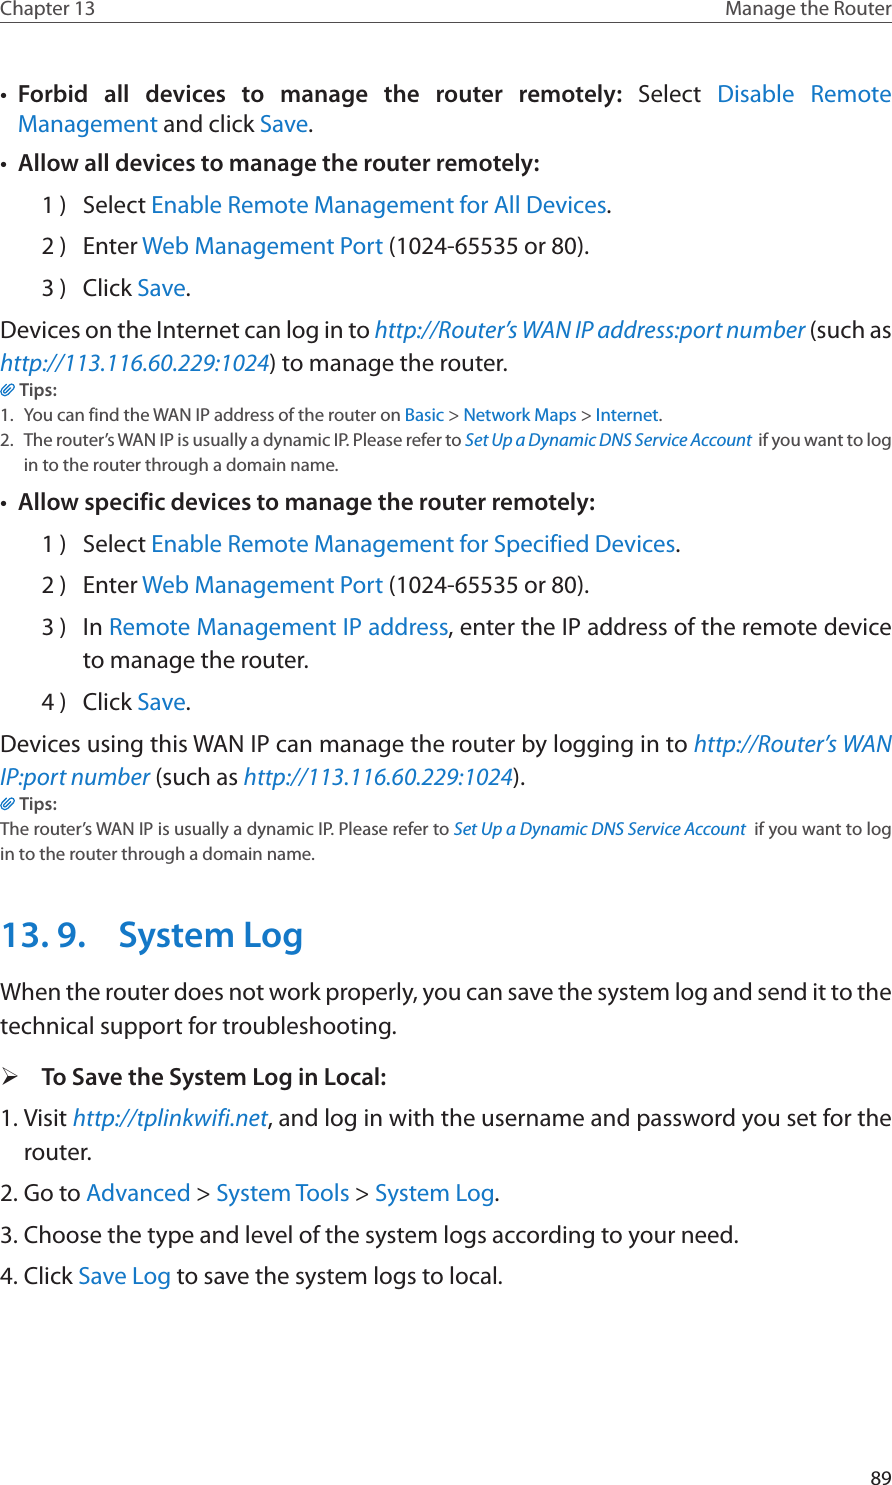 89Chapter 13 Manage the Router •  Forbid all devices to manage the router remotely:  Select  Disable Remote Management and click Save.•  Allow all devices to manage the router remotely:1 )  Select Enable Remote Management for All Devices.2 )  Enter Web Management Port (1024-65535 or 80).3 )  Click Save.Devices on the Internet can log in to http://Router’s WAN IP address:port number (such as http://113.116.60.229:1024) to manage the router.Tips:1.  You can find the WAN IP address of the router on Basic &gt; Network Maps &gt; Internet.2.  The router’s WAN IP is usually a dynamic IP. Please refer to Set Up a Dynamic DNS Service Account  if you want to log in to the router through a domain name.•  Allow specific devices to manage the router remotely:1 )  Select Enable Remote Management for Specified Devices.2 )  Enter Web Management Port (1024-65535 or 80).3 )  In Remote Management IP address, enter the IP address of the remote device to manage the router.4 )  Click Save.Devices using this WAN IP can manage the router by logging in to http://Router’s WAN IP:port number (such as http://113.116.60.229:1024).Tips: The router’s WAN IP is usually a dynamic IP. Please refer to Set Up a Dynamic DNS Service Account  if you want to log in to the router through a domain name.13. 9.  System LogWhen the router does not work properly, you can save the system log and send it to the technical support for troubleshooting. ¾To Save the System Log in Local:1. Visit http://tplinkwifi.net, and log in with the username and password you set for the router.2. Go to Advanced &gt; System Tools &gt; System Log.3. Choose the type and level of the system logs according to your need.4. Click Save Log to save the system logs to local.